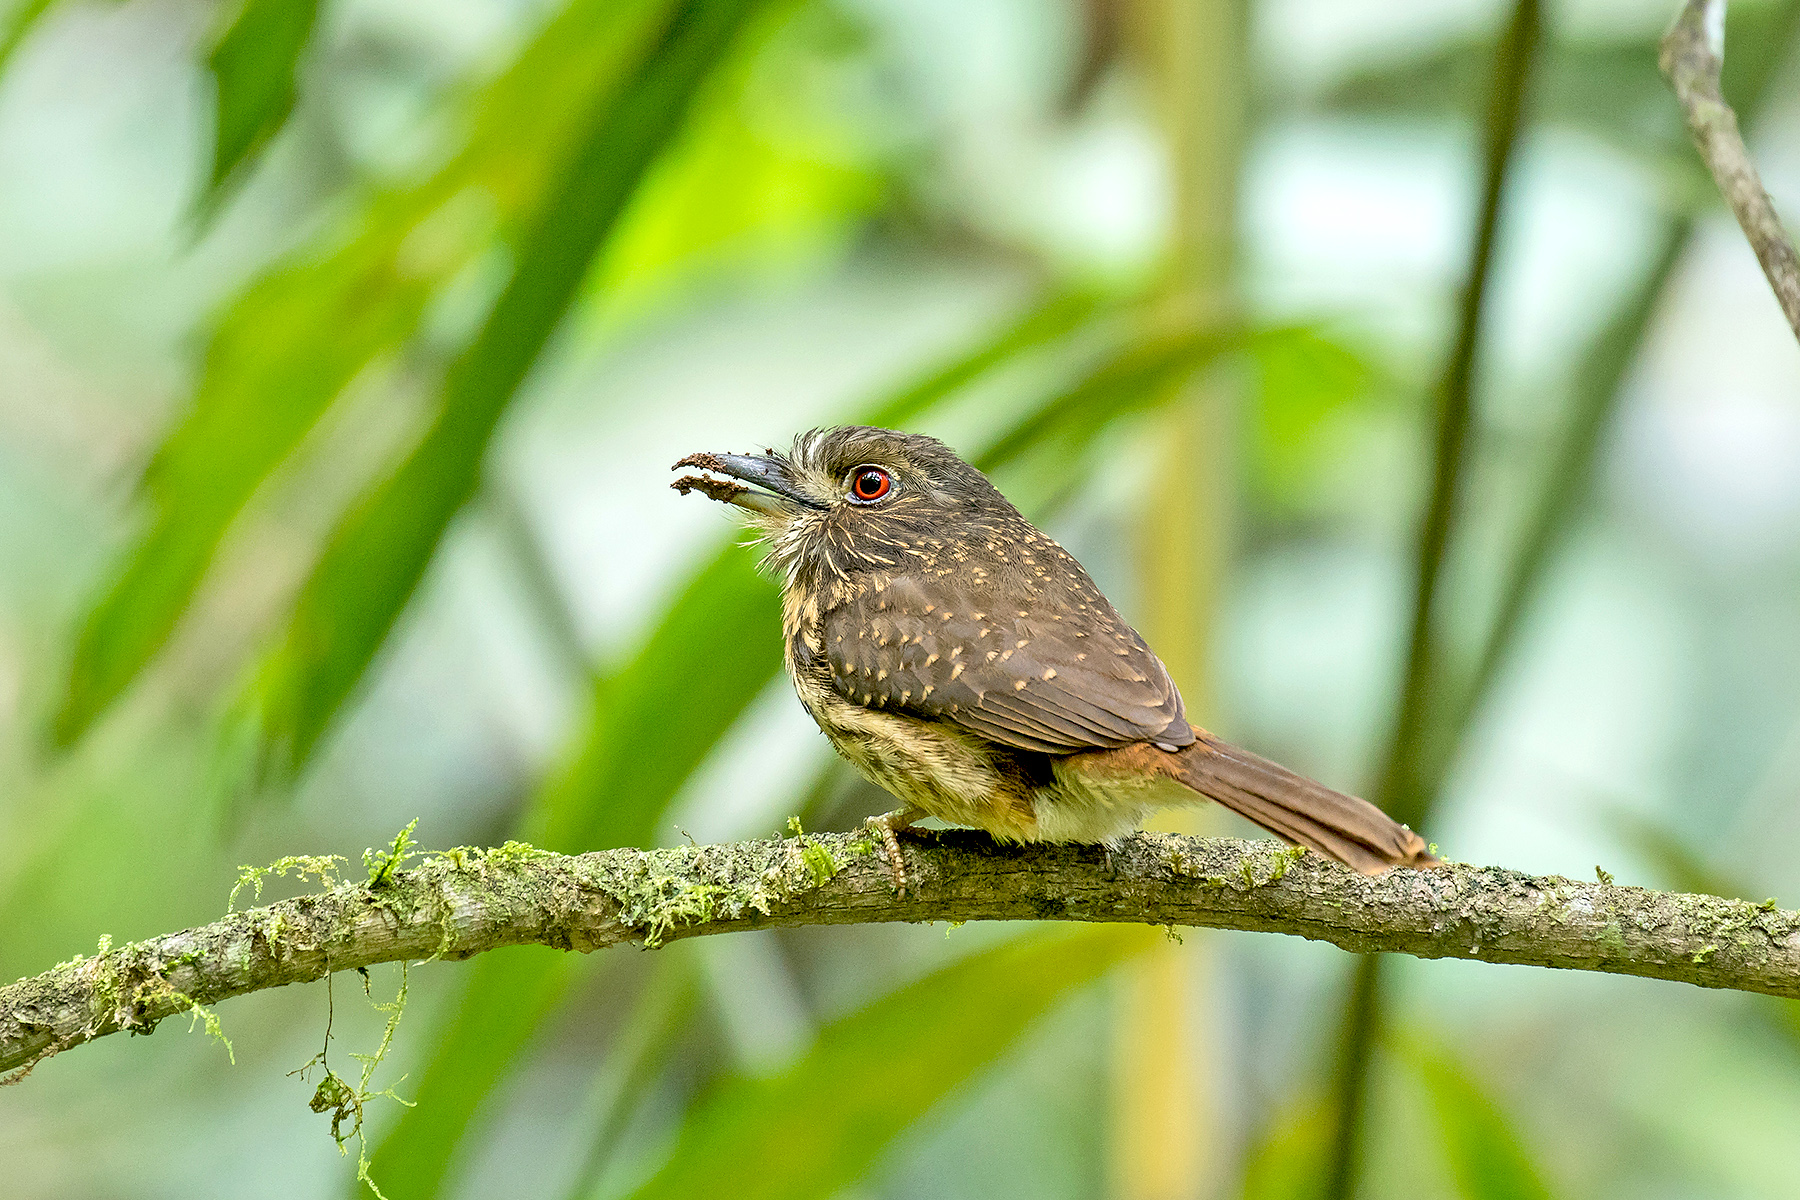 White-whiskered Puffbird in Costa Rica (image by Pete Morris)